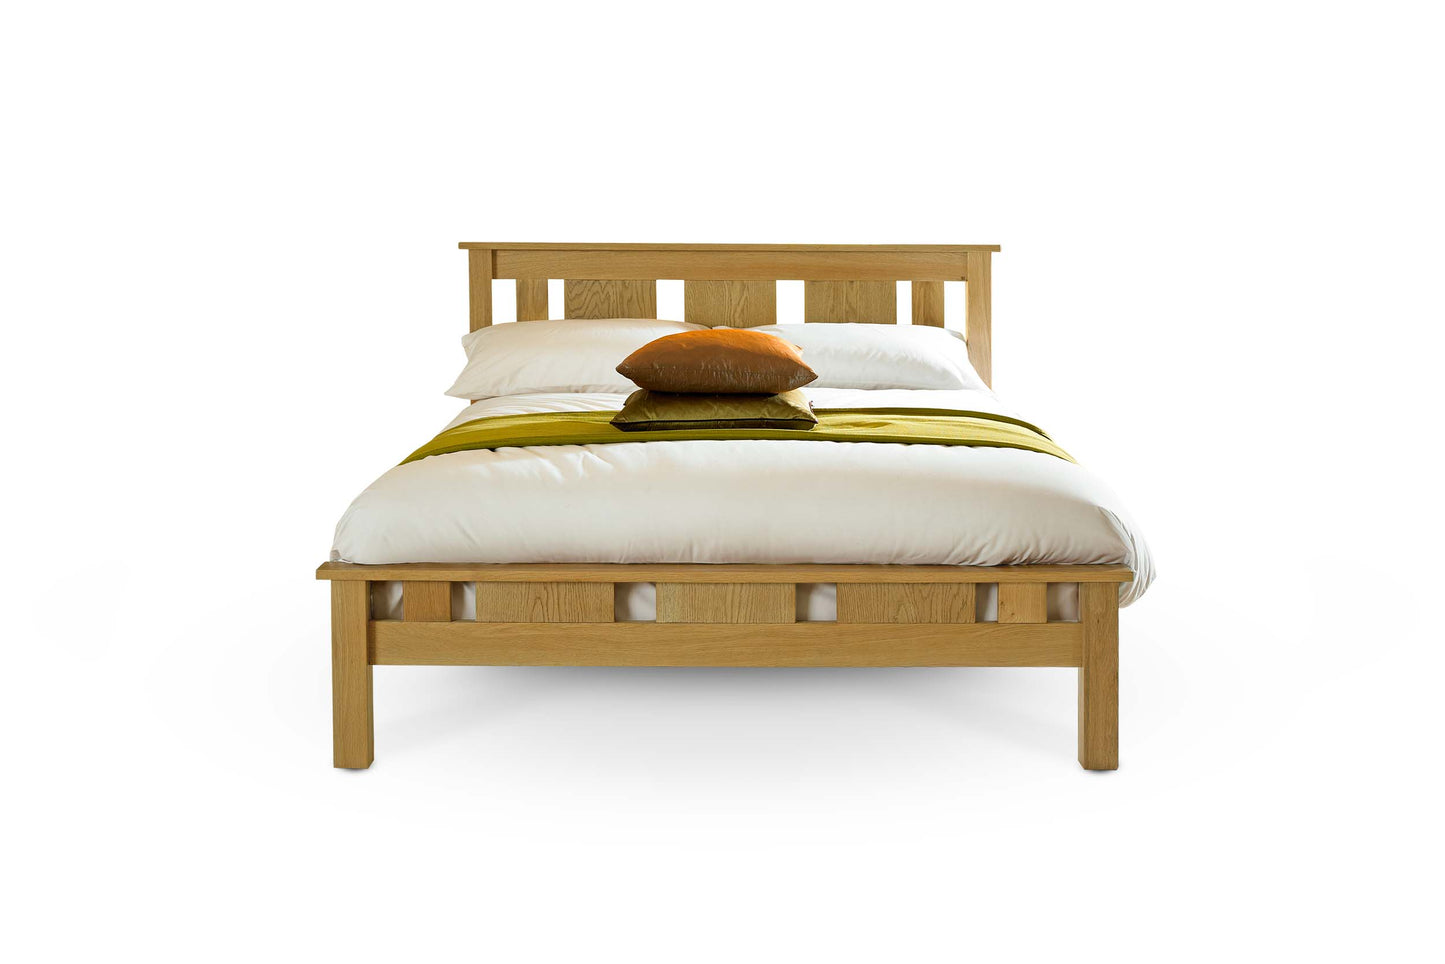 Lymington Bed Frame - 4ft Small Double - Natural Oak